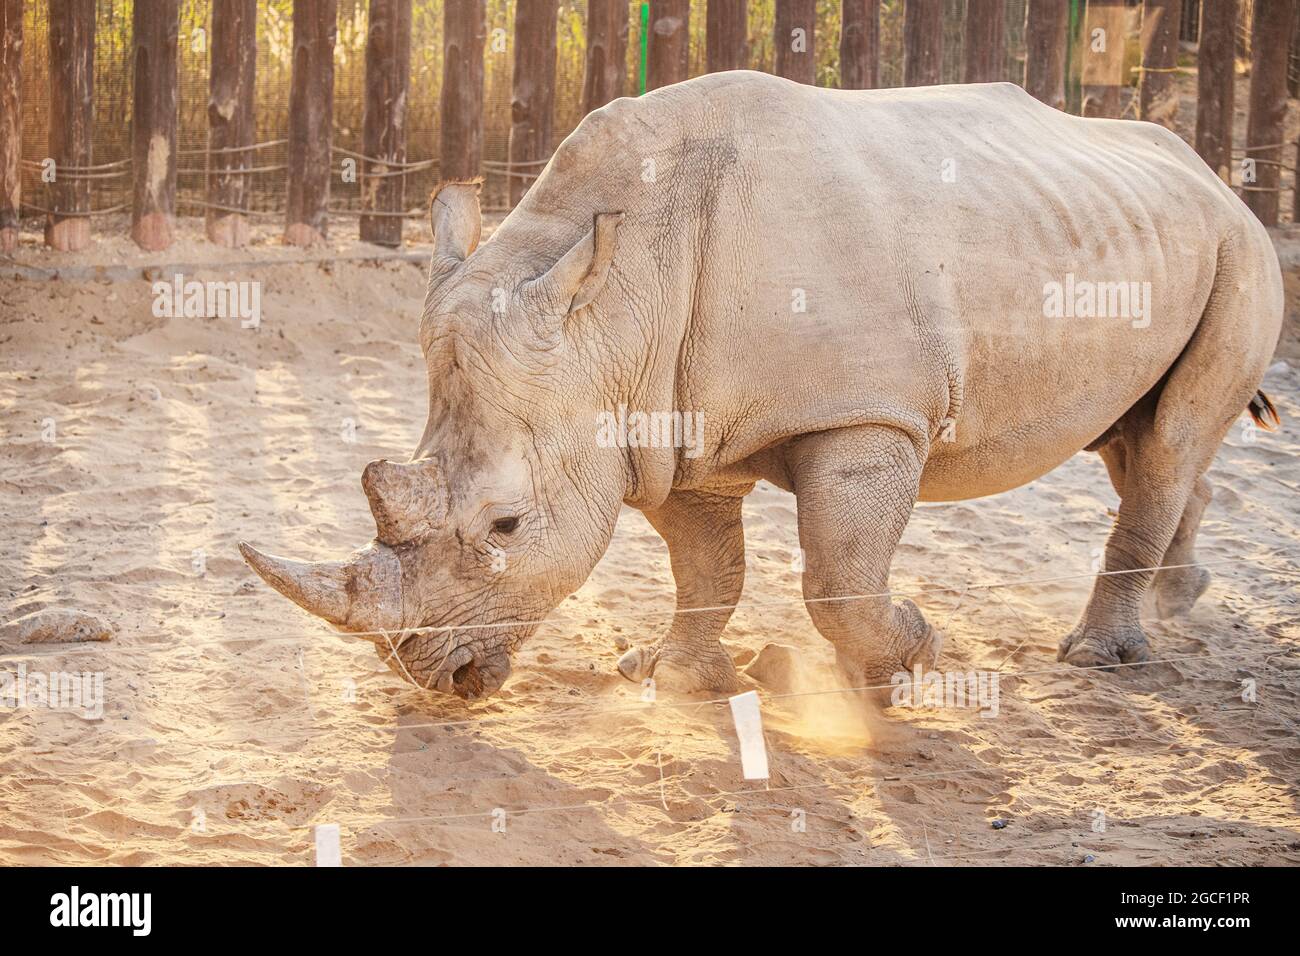 A huge powerful and strong rhinoceros in the zoo on the background of the fence. A symbol of muscular strength and thick skin Stock Photo